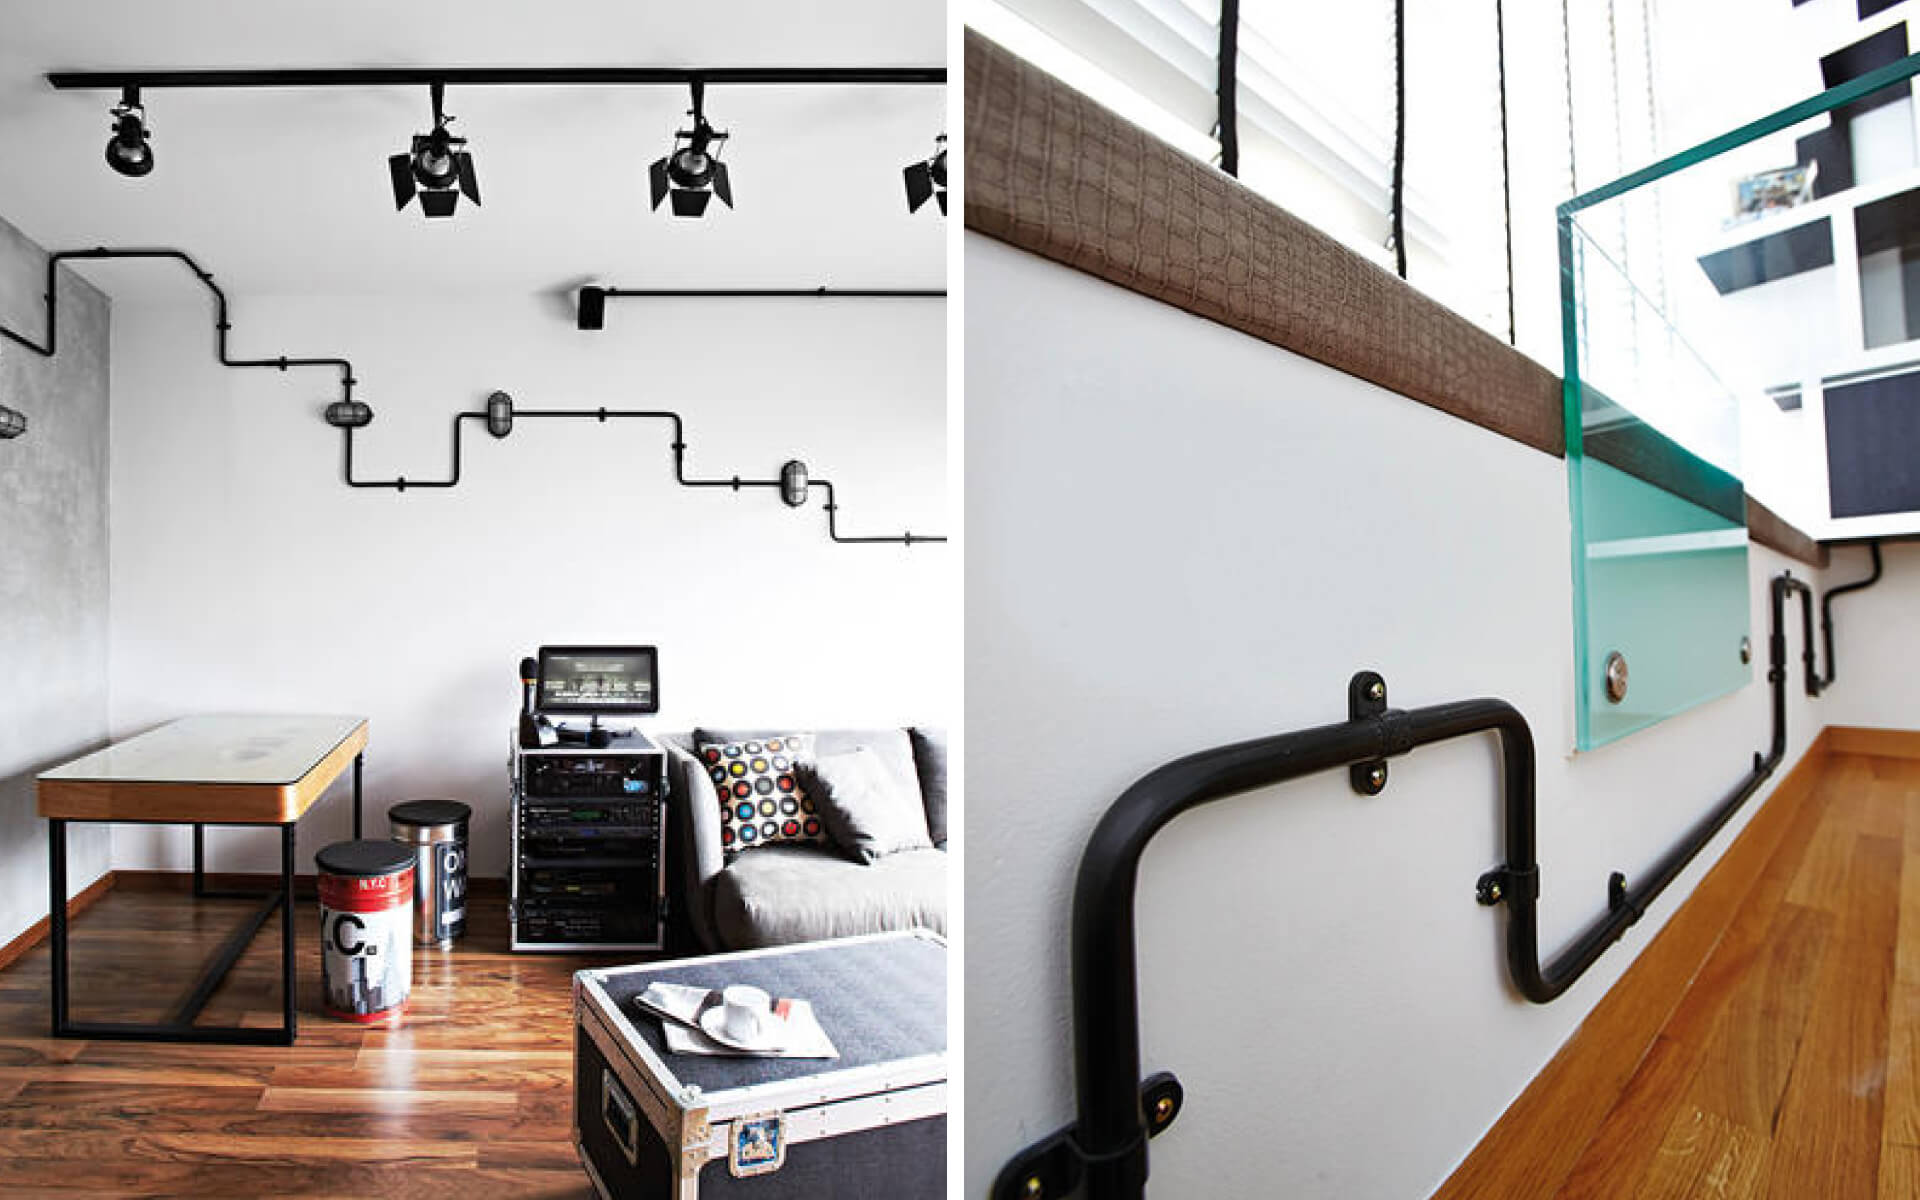 Exposed wires act as wall decorations in a living room.